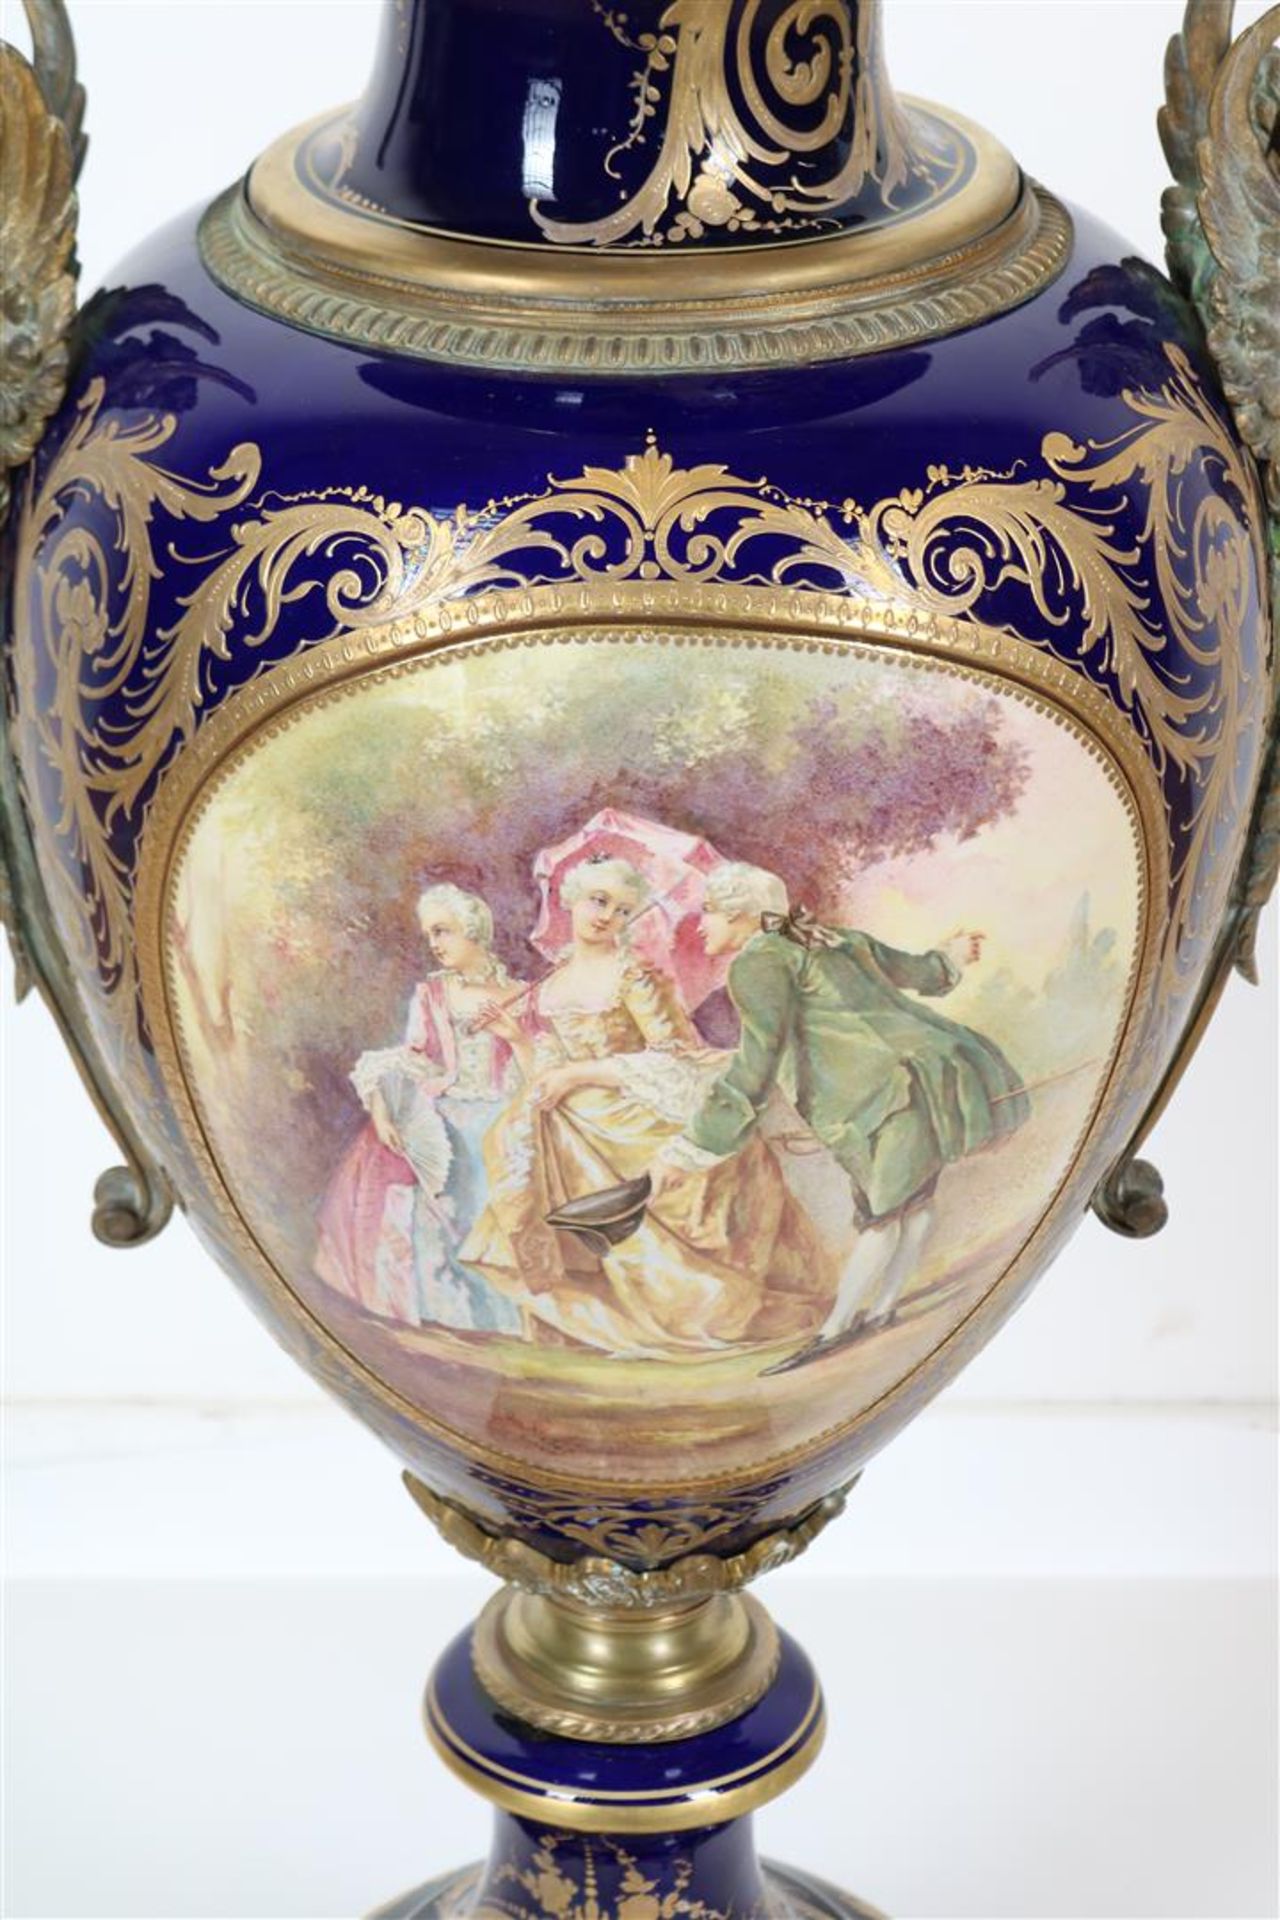 Porcelain Sevres urn vase with fixed lid, double painted decor of romantic scene of figures in - Image 4 of 8